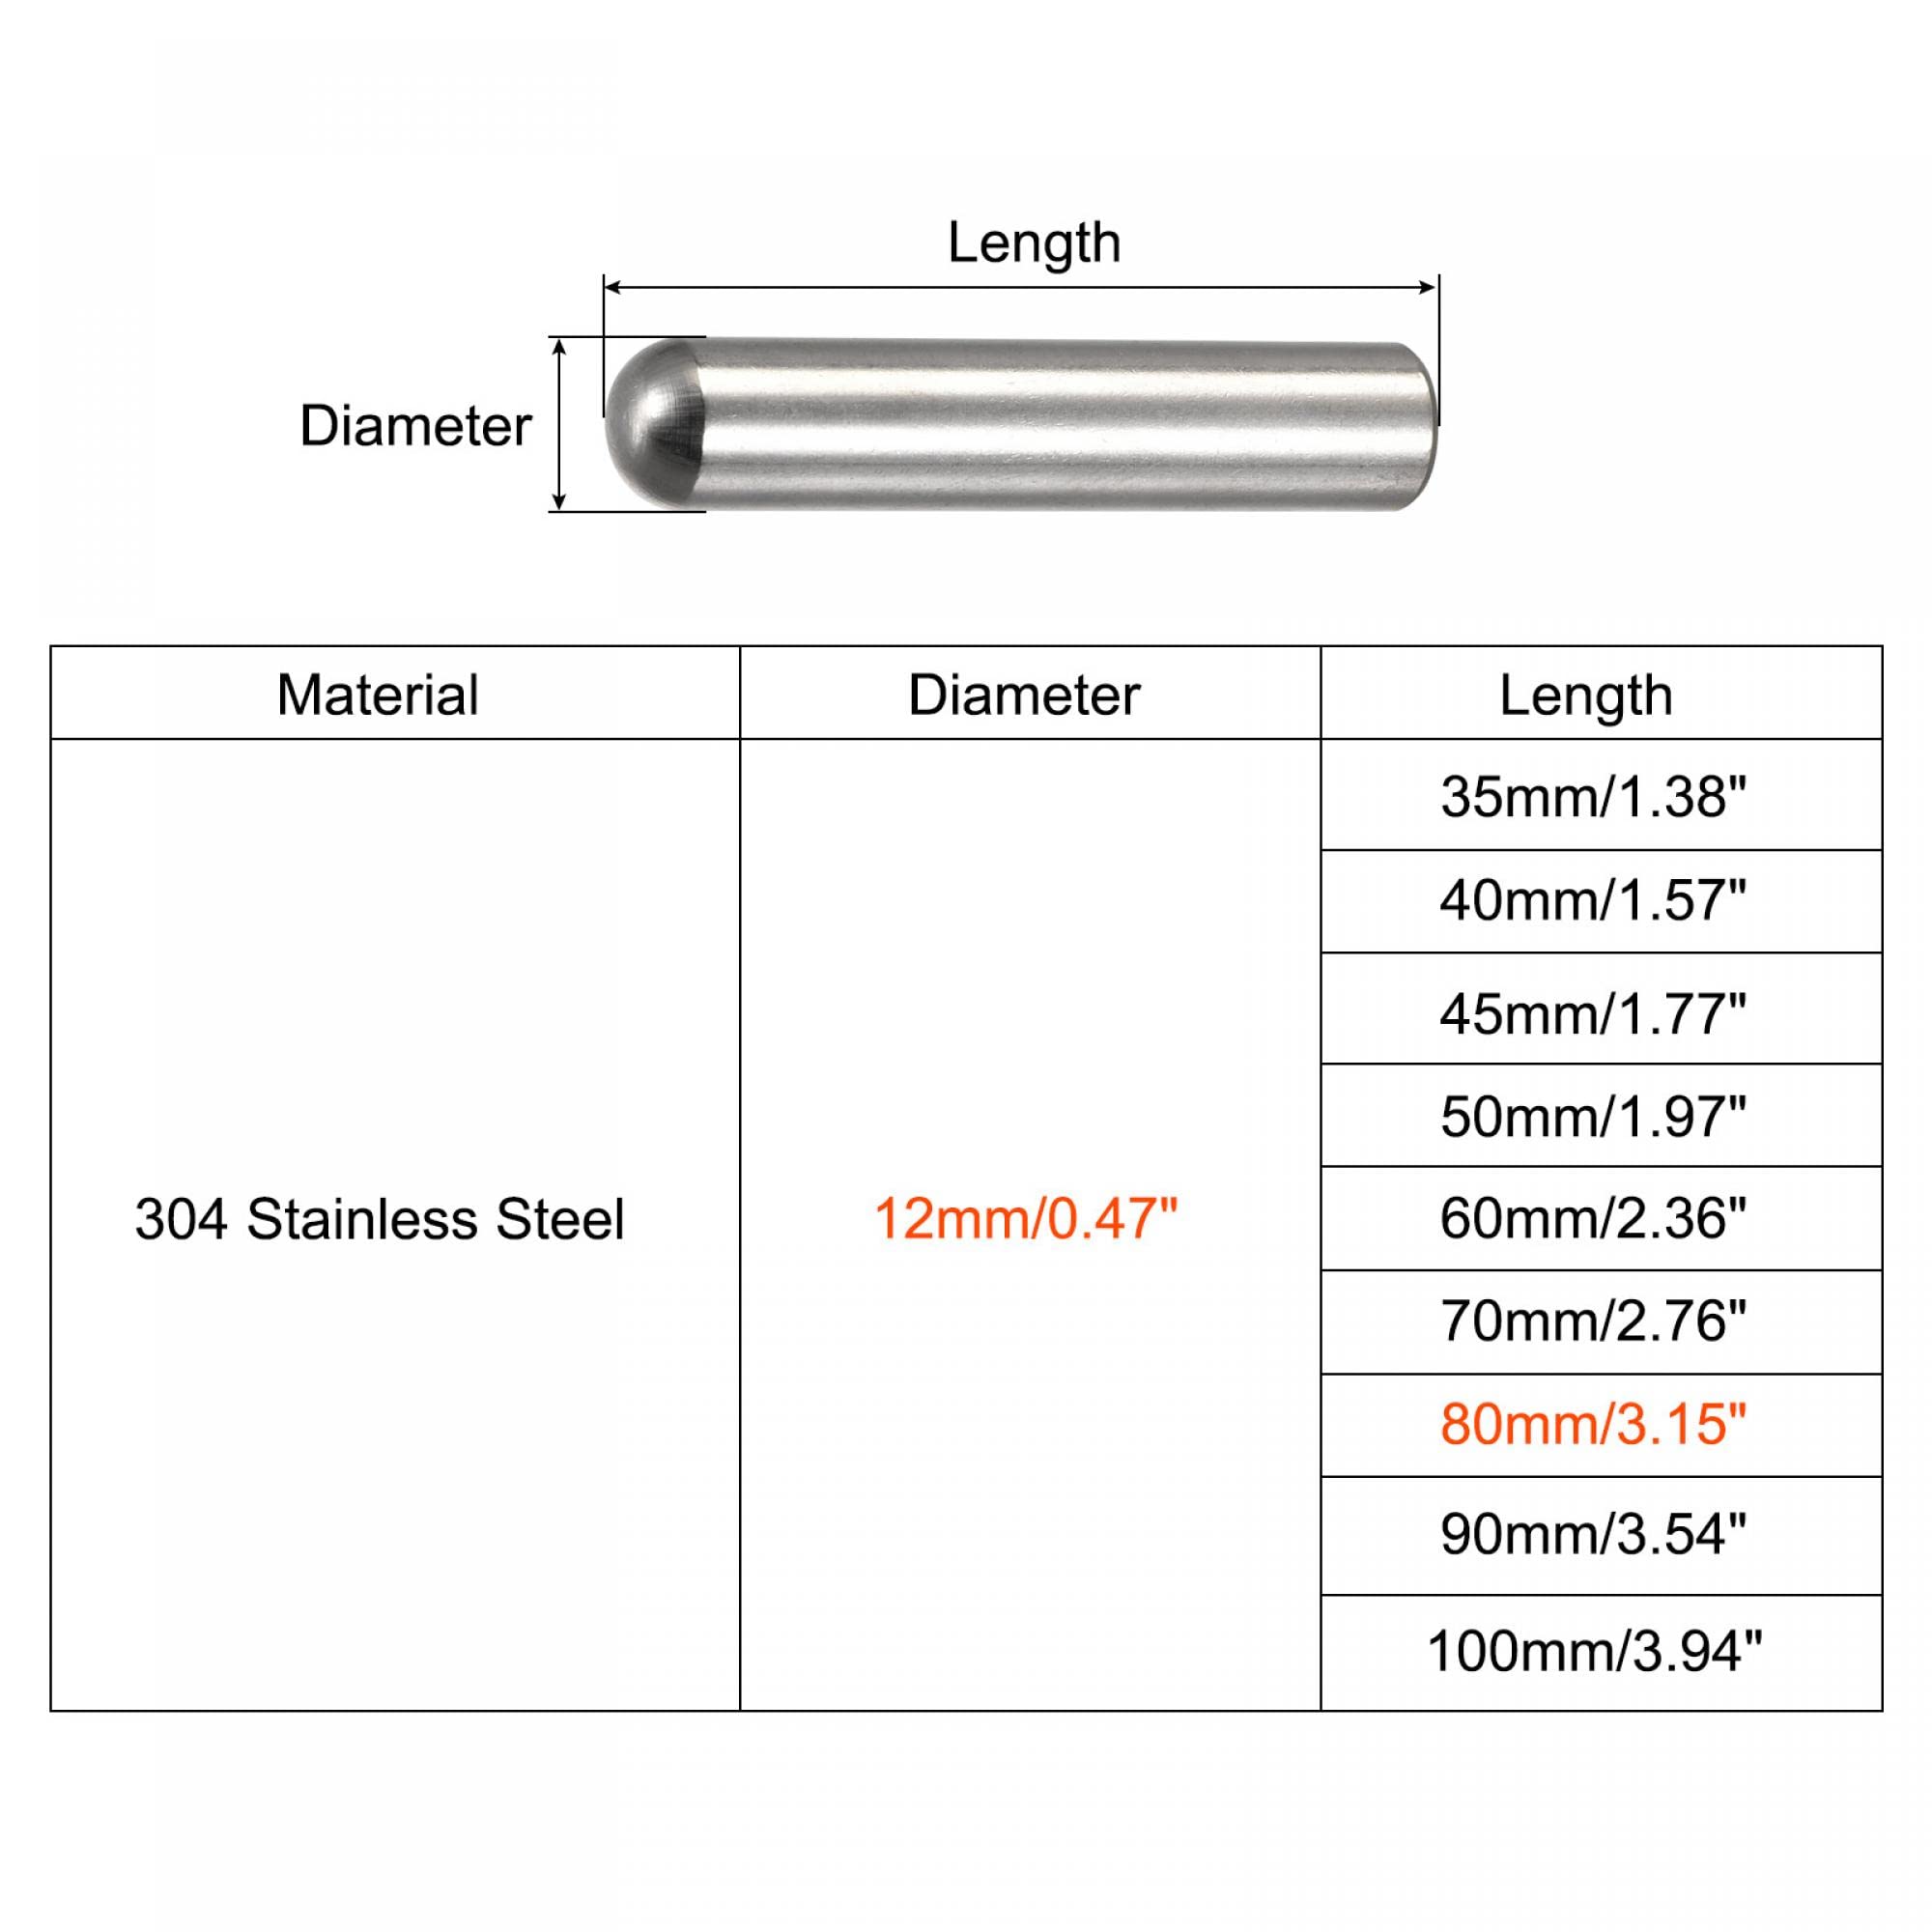 uxcell 12x80mm Dowel Pins, 2pcs 304 Stainless Steel Round Head Flat Chamfered End Dowel Pin Bunk Bed Pins Shelf Pegs Support Shelves Fasten Elements